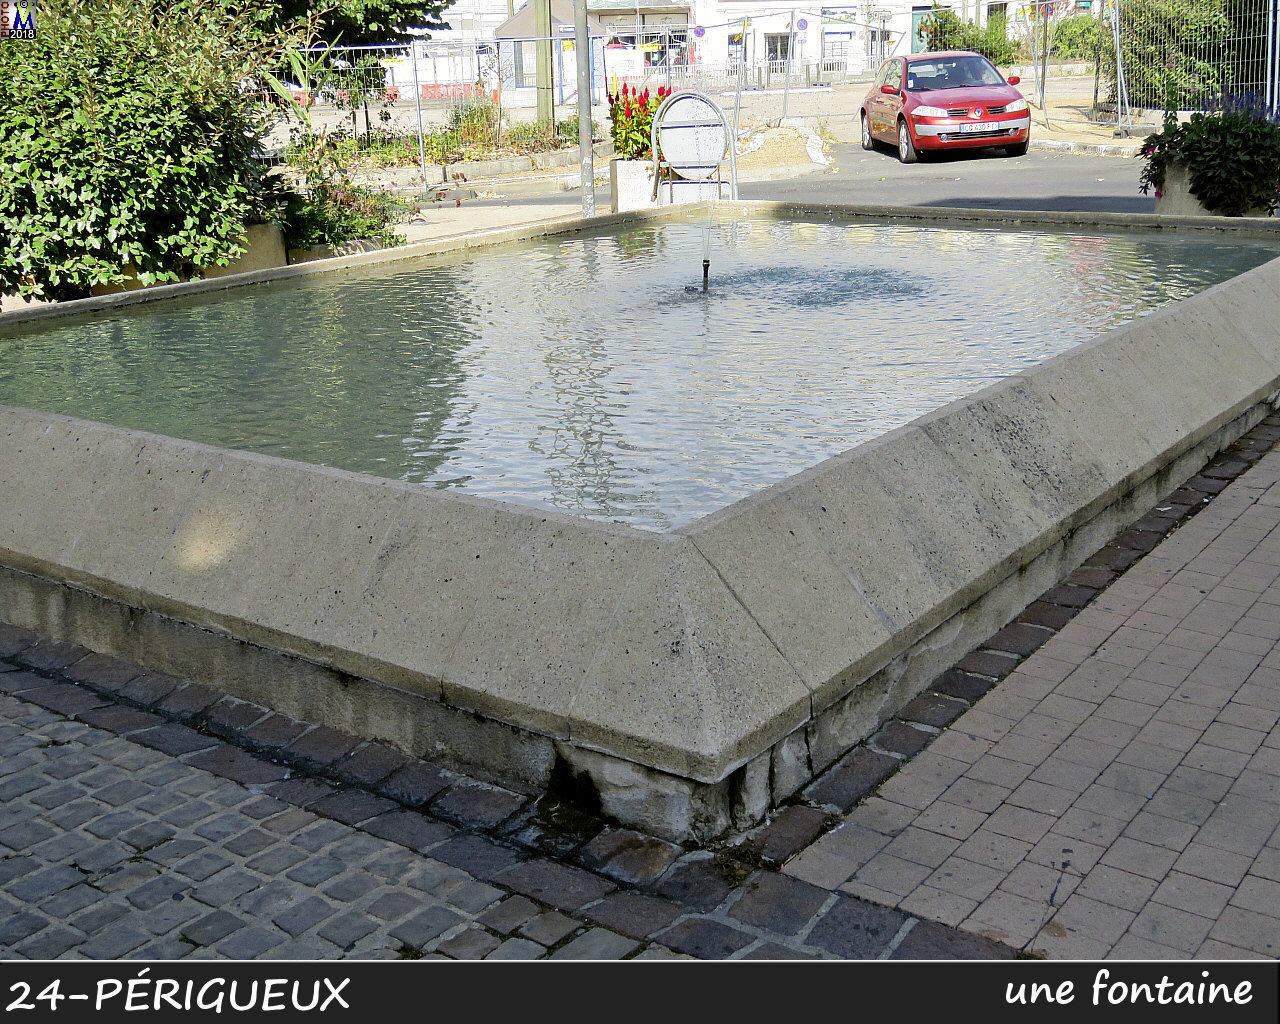 24PERIGUEUX_fontaine_1000.jpg